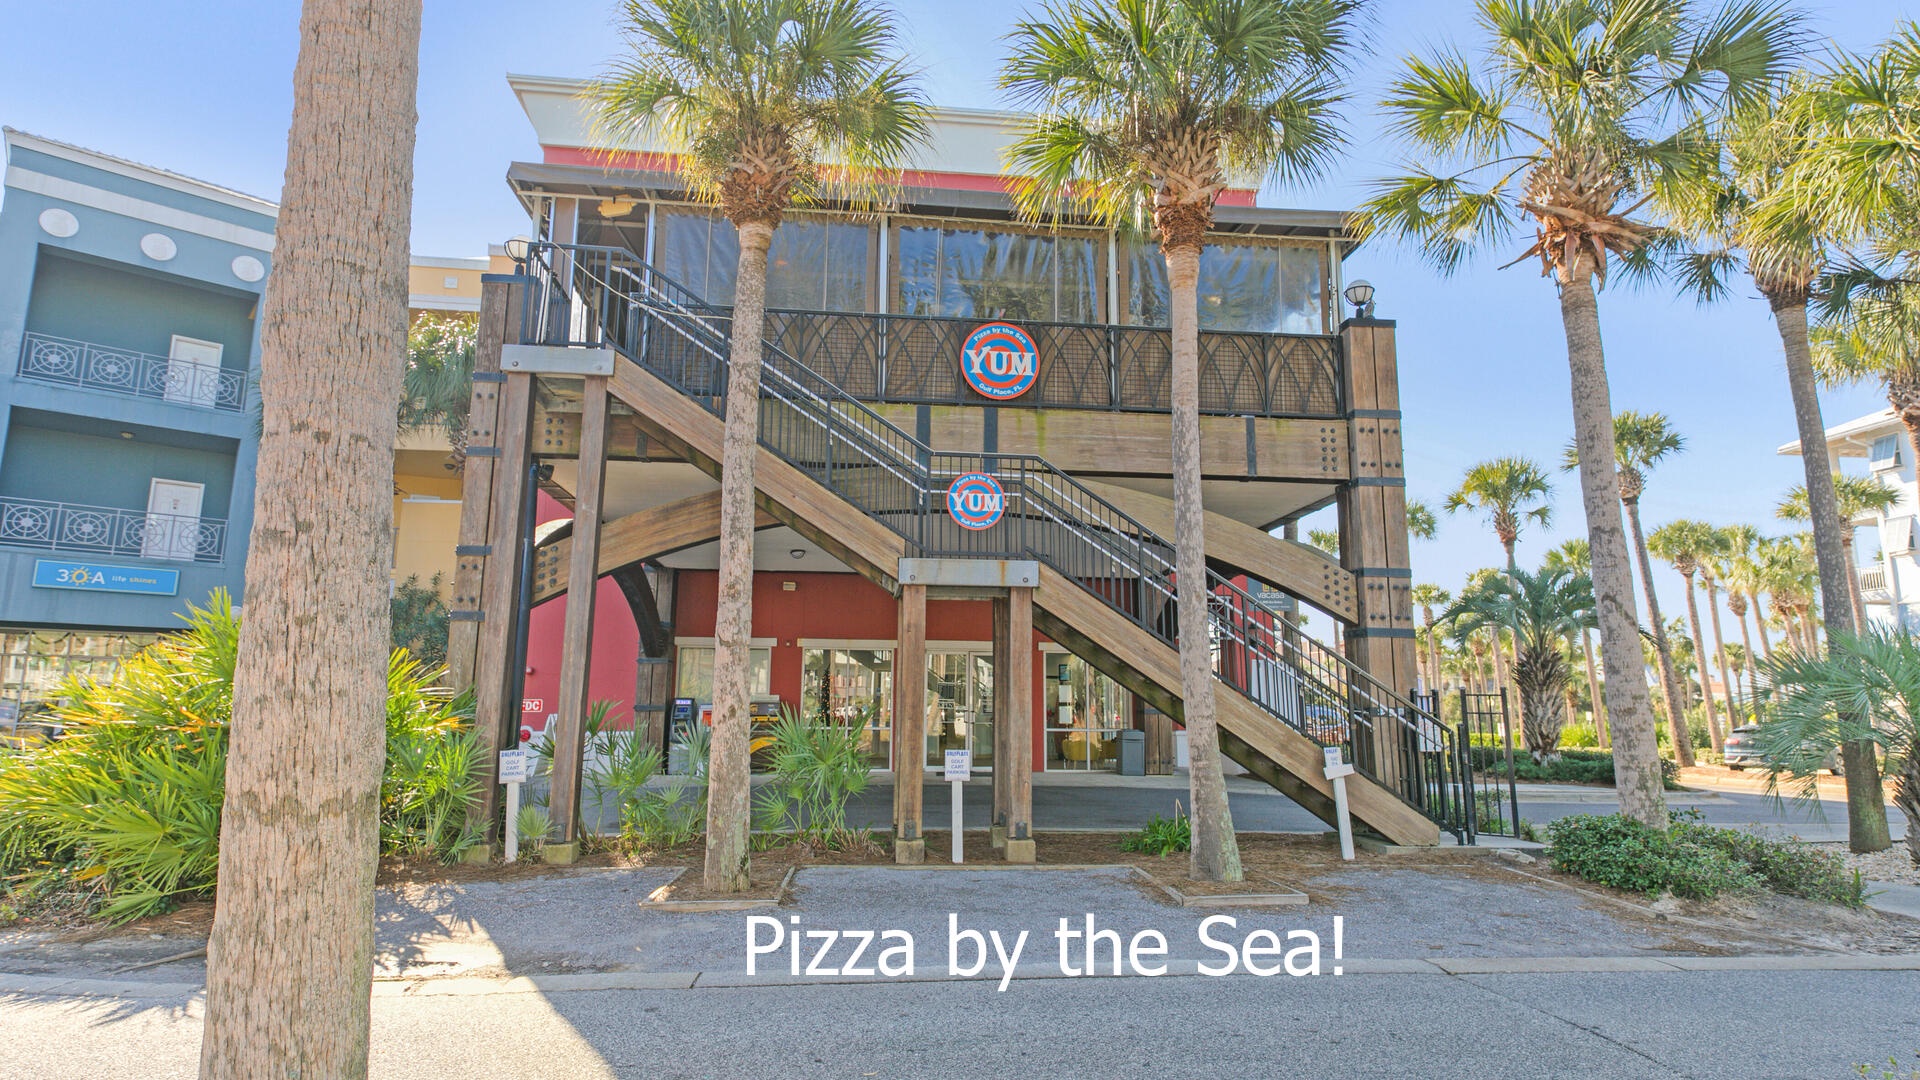 Dining, shopping and fun are easy to get to at Gulf Place, just down the road!